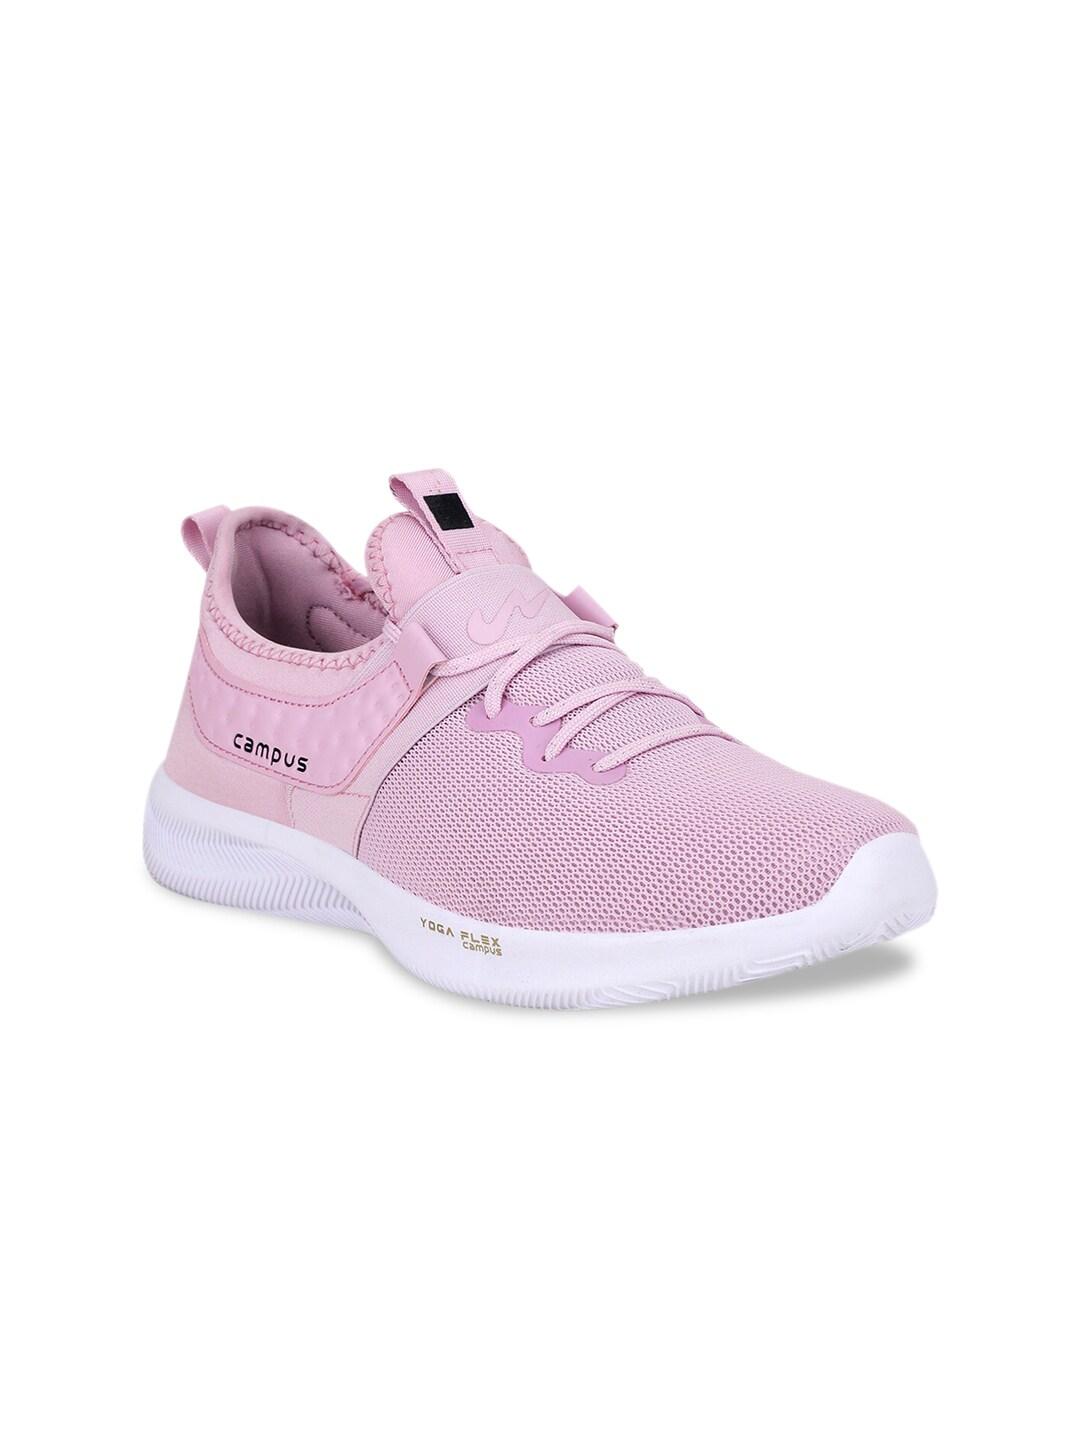 campus women lavender mesh mid-top running shoes